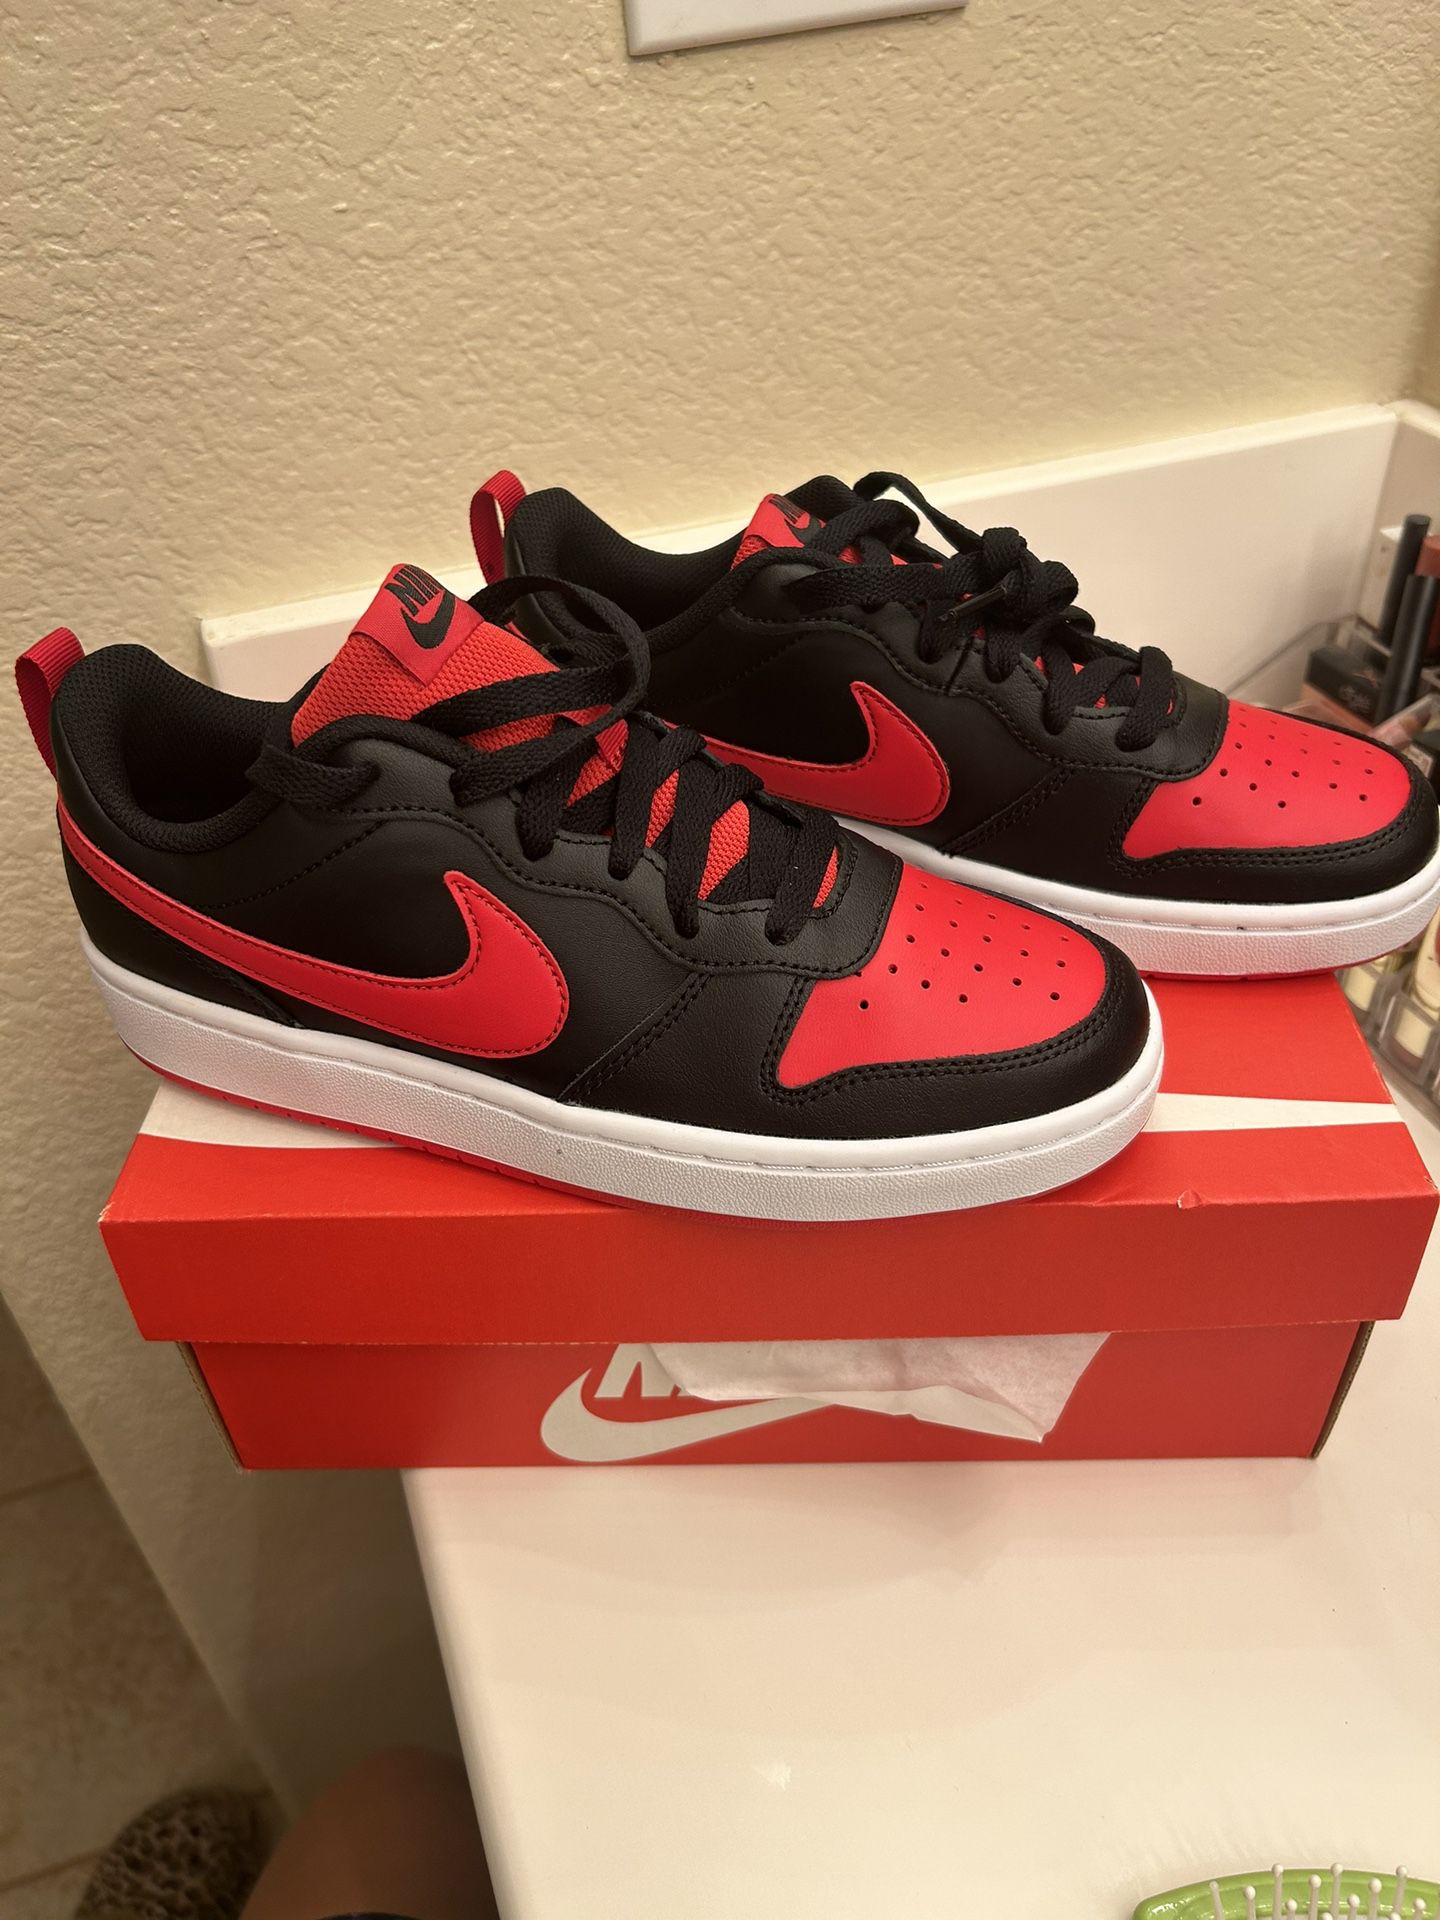 Red And Black Nike Shoes for Sale in Wildomar, CA - OfferUp